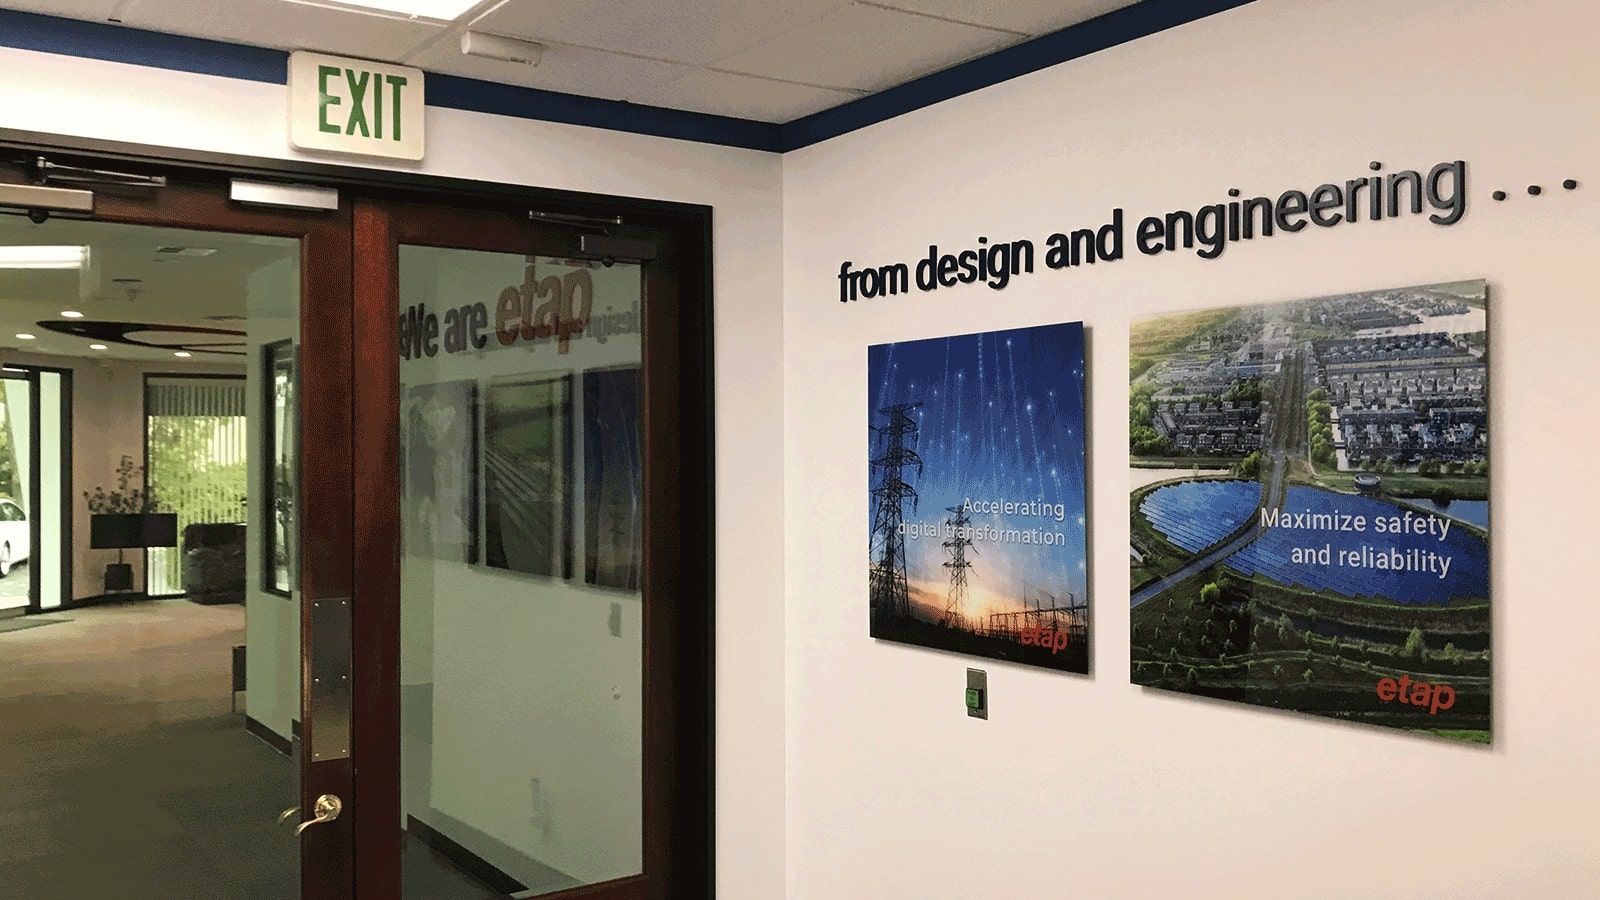 Etap acrylic signs attached to the wall